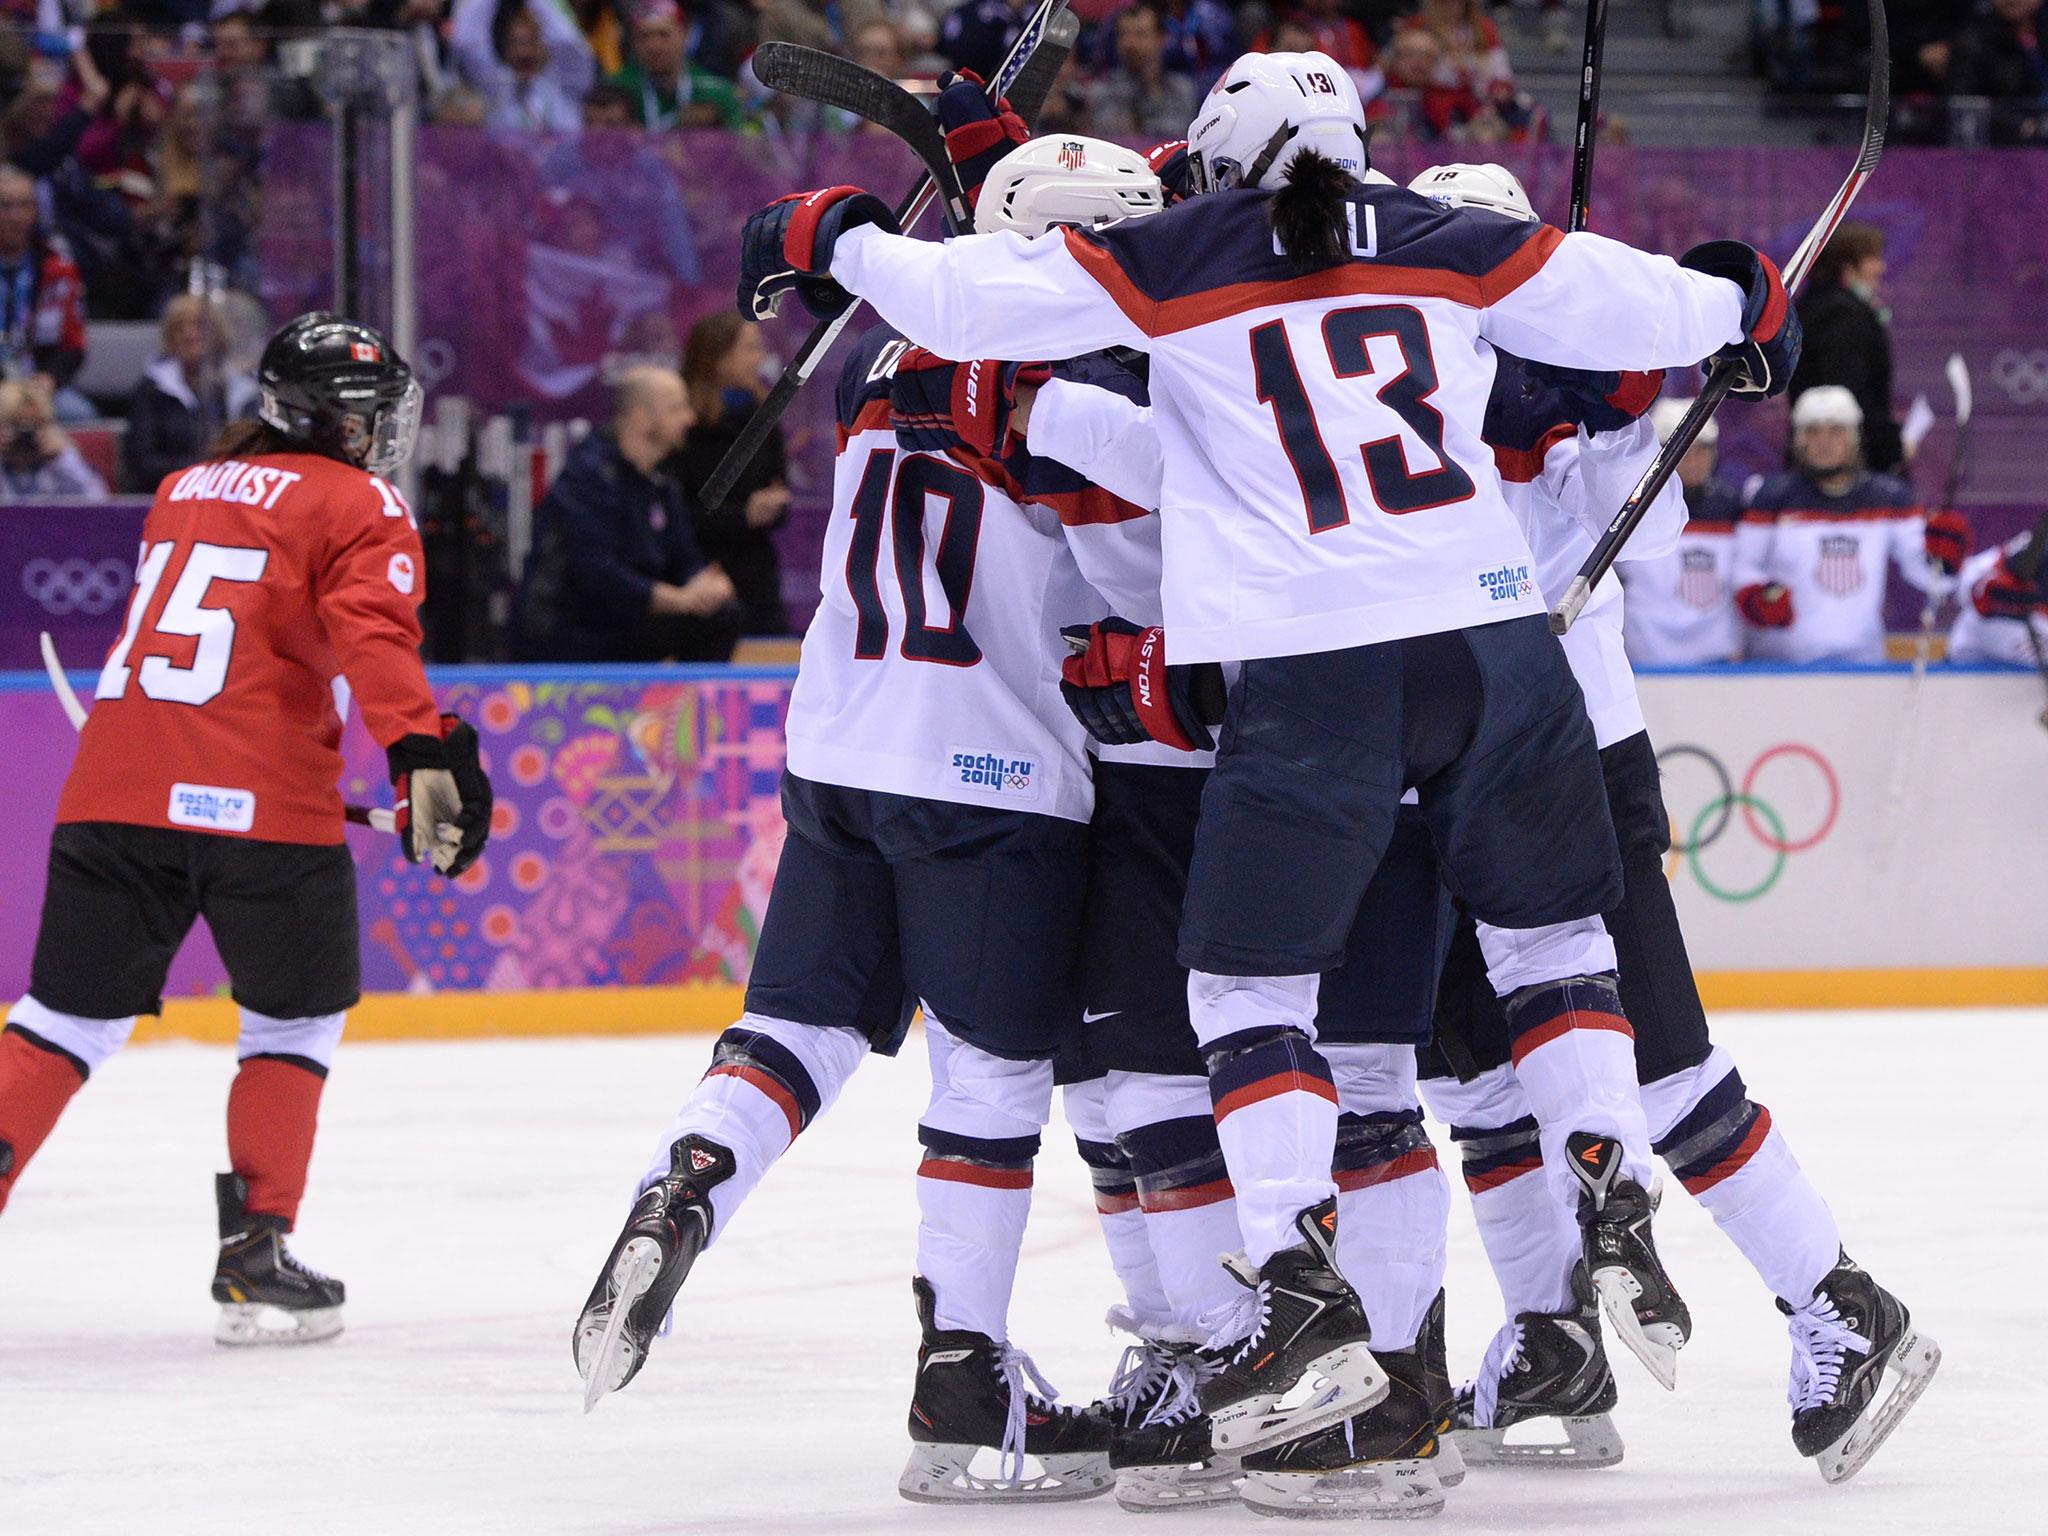 The USA women's team have agreed the deal and will now defend their title